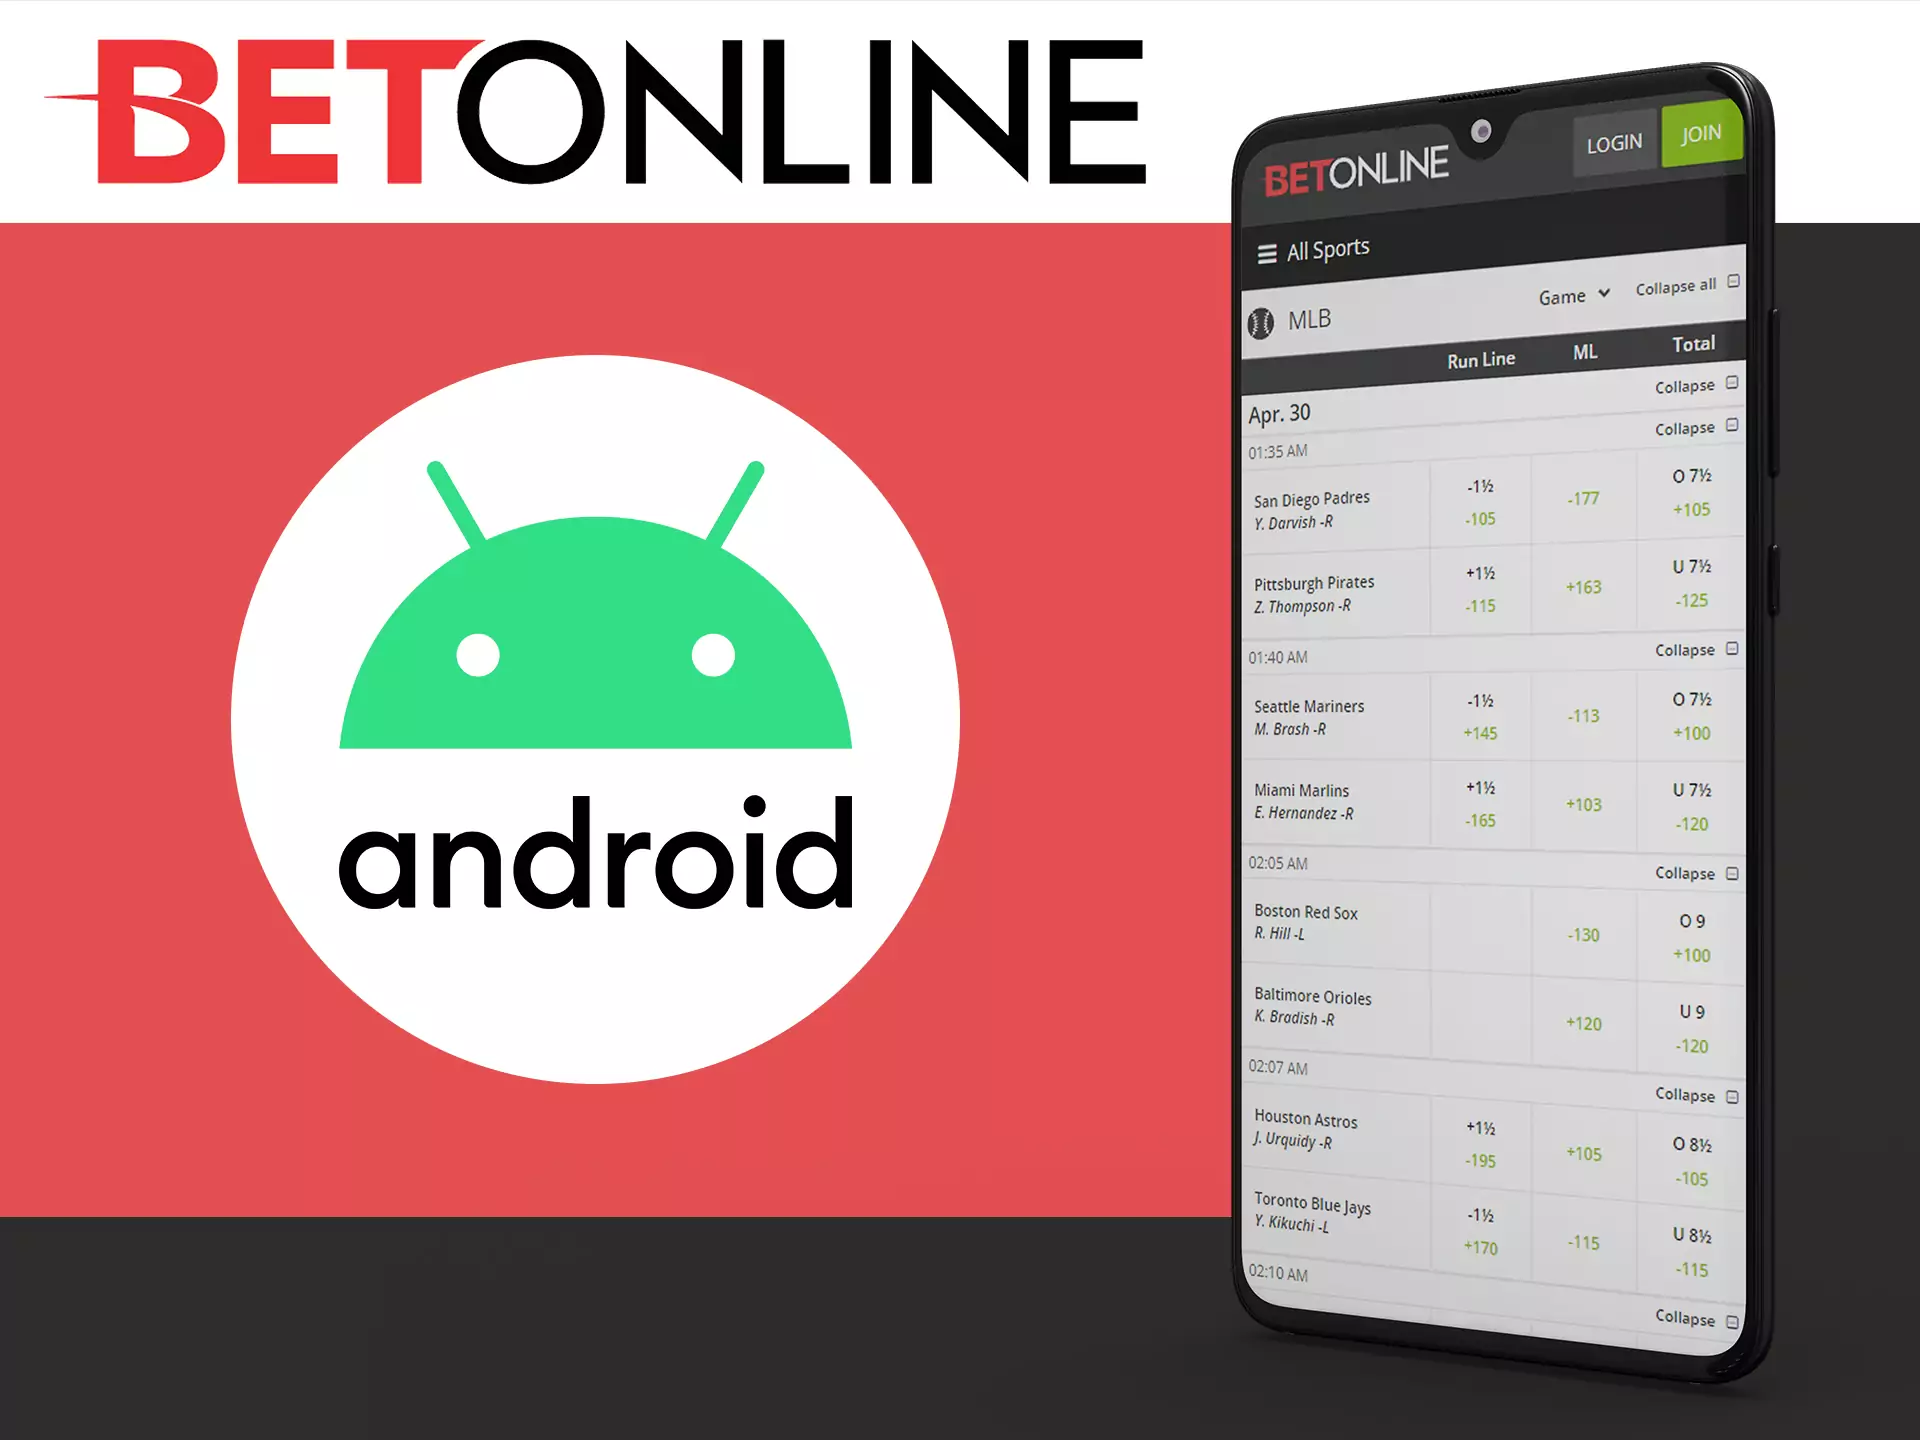 The Betonline app supports most Android smartphones.